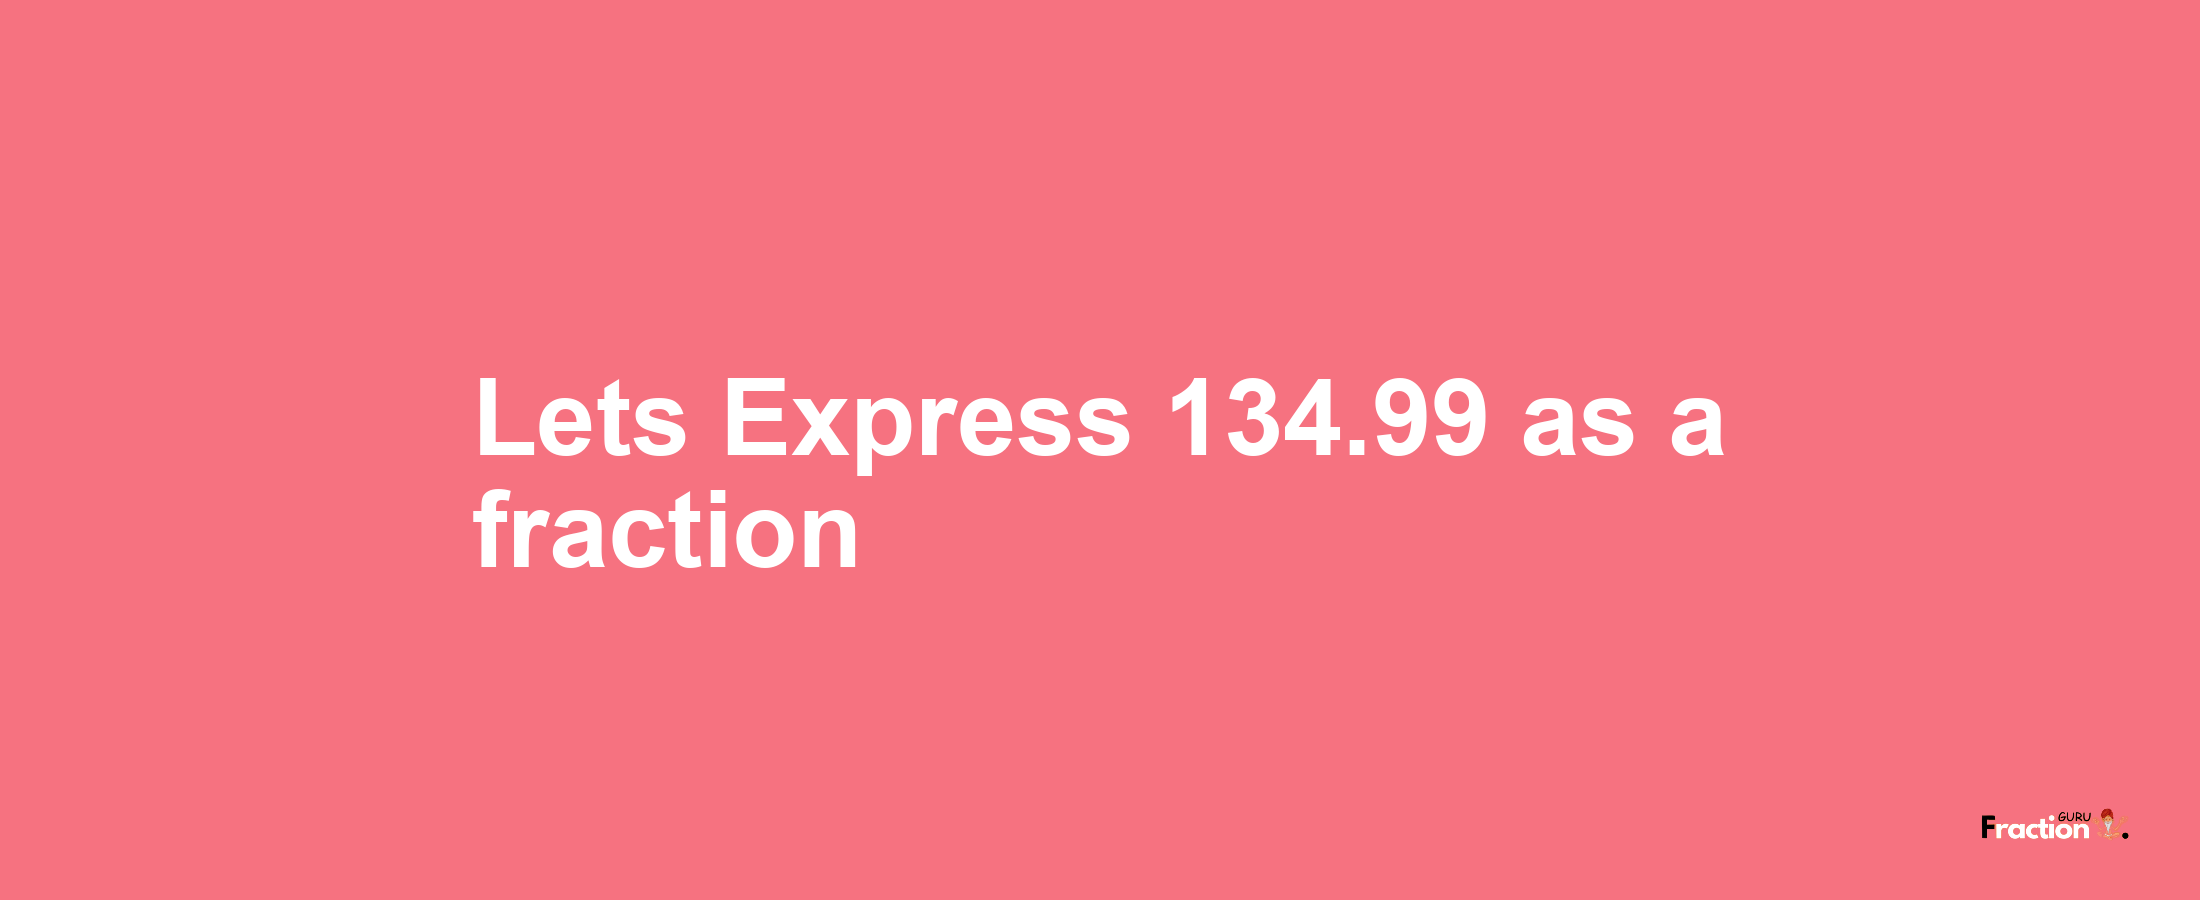 Lets Express 134.99 as afraction